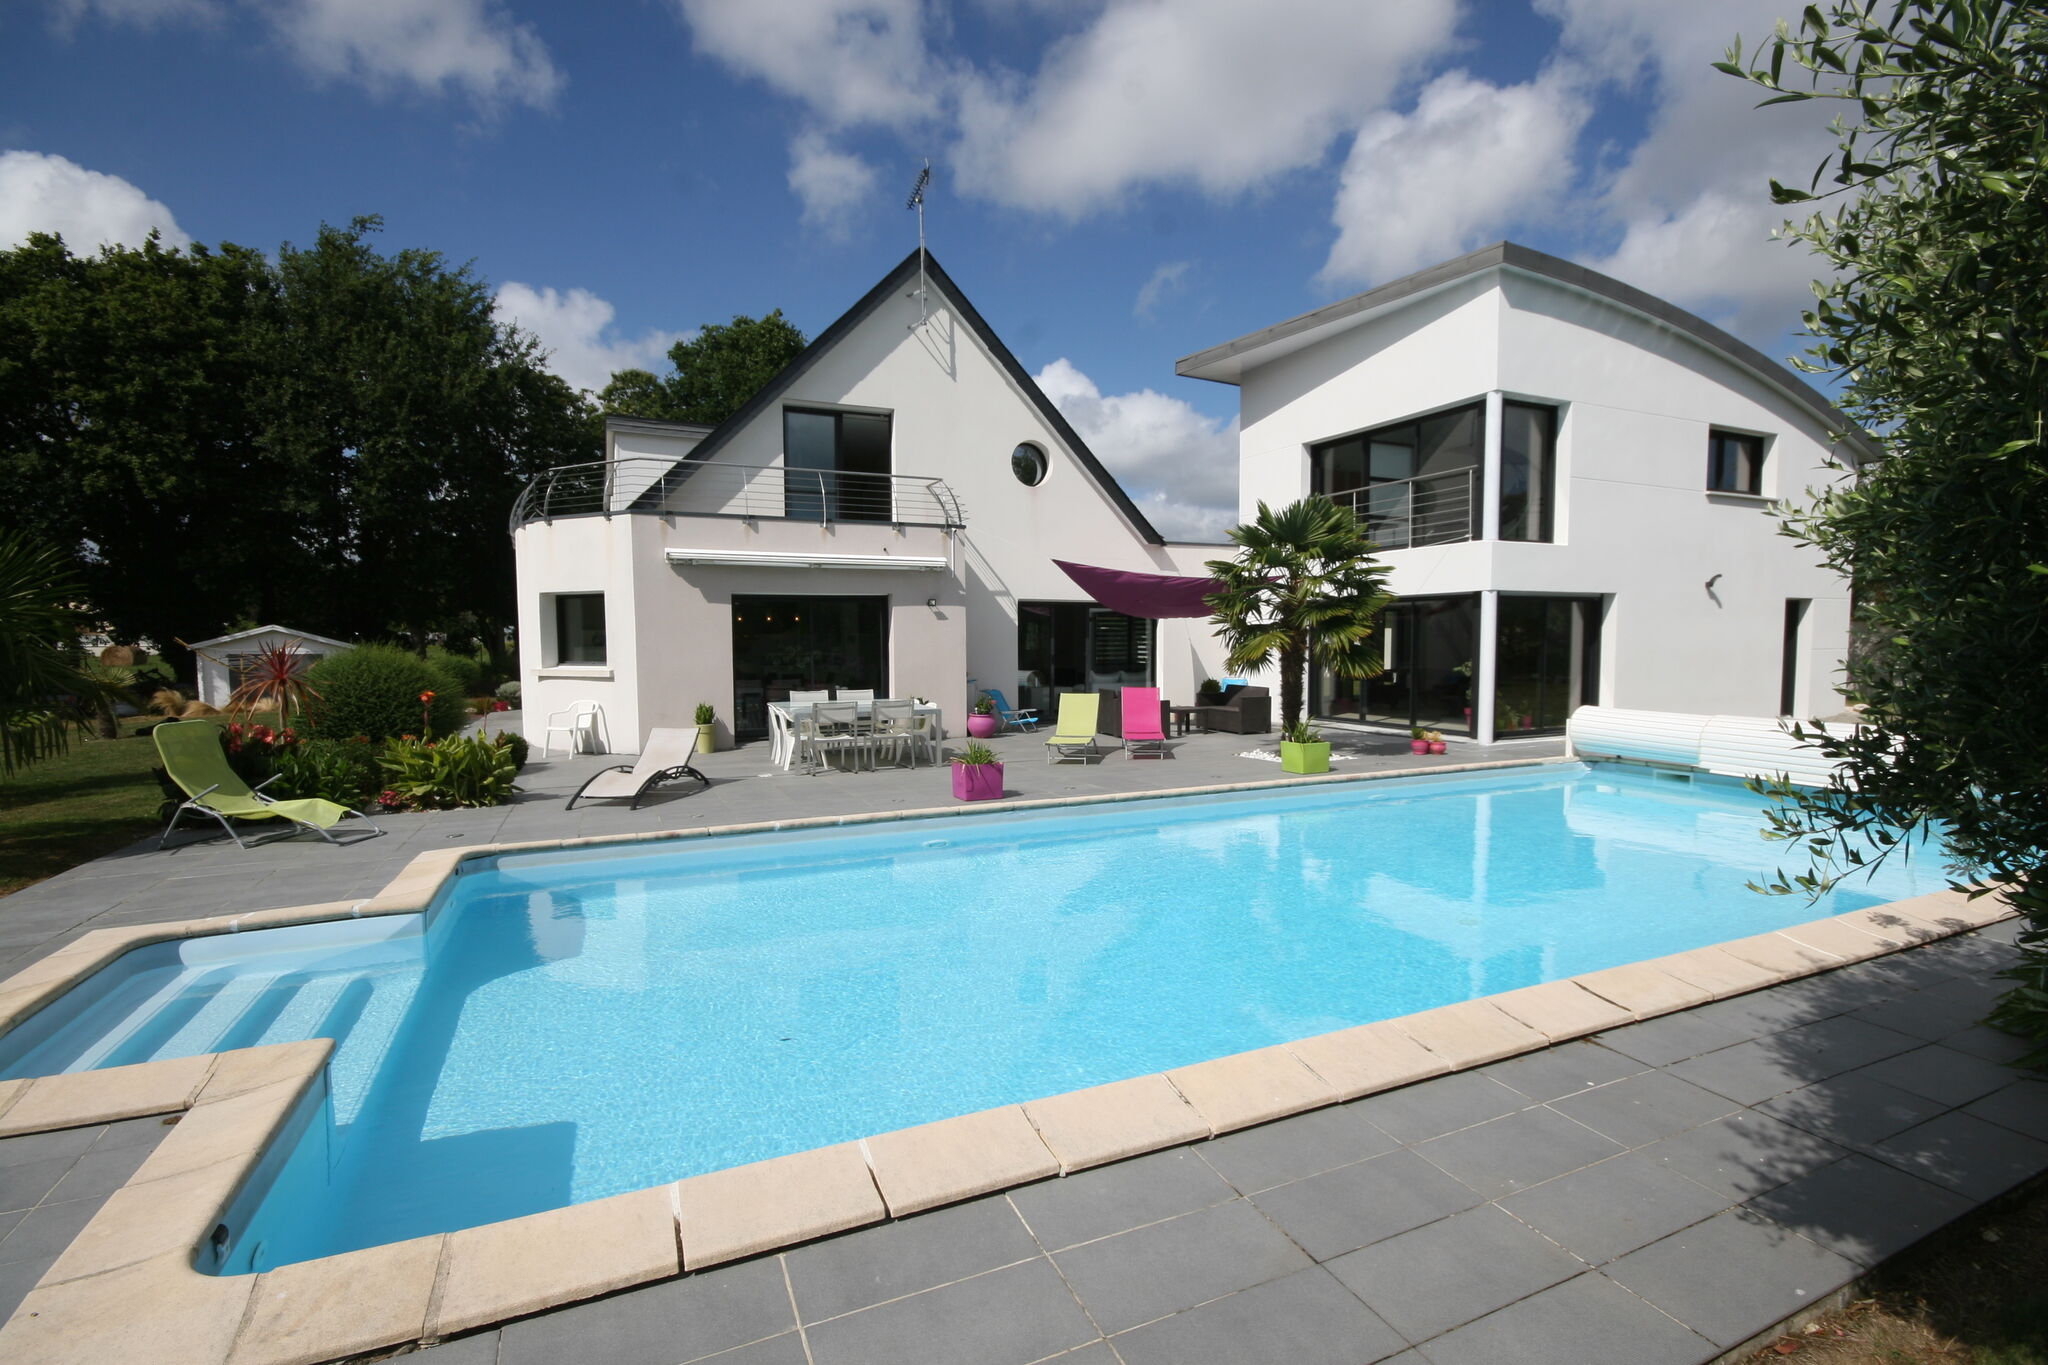 Modern villa with private heated pool, located 2 km from the sandy beach.